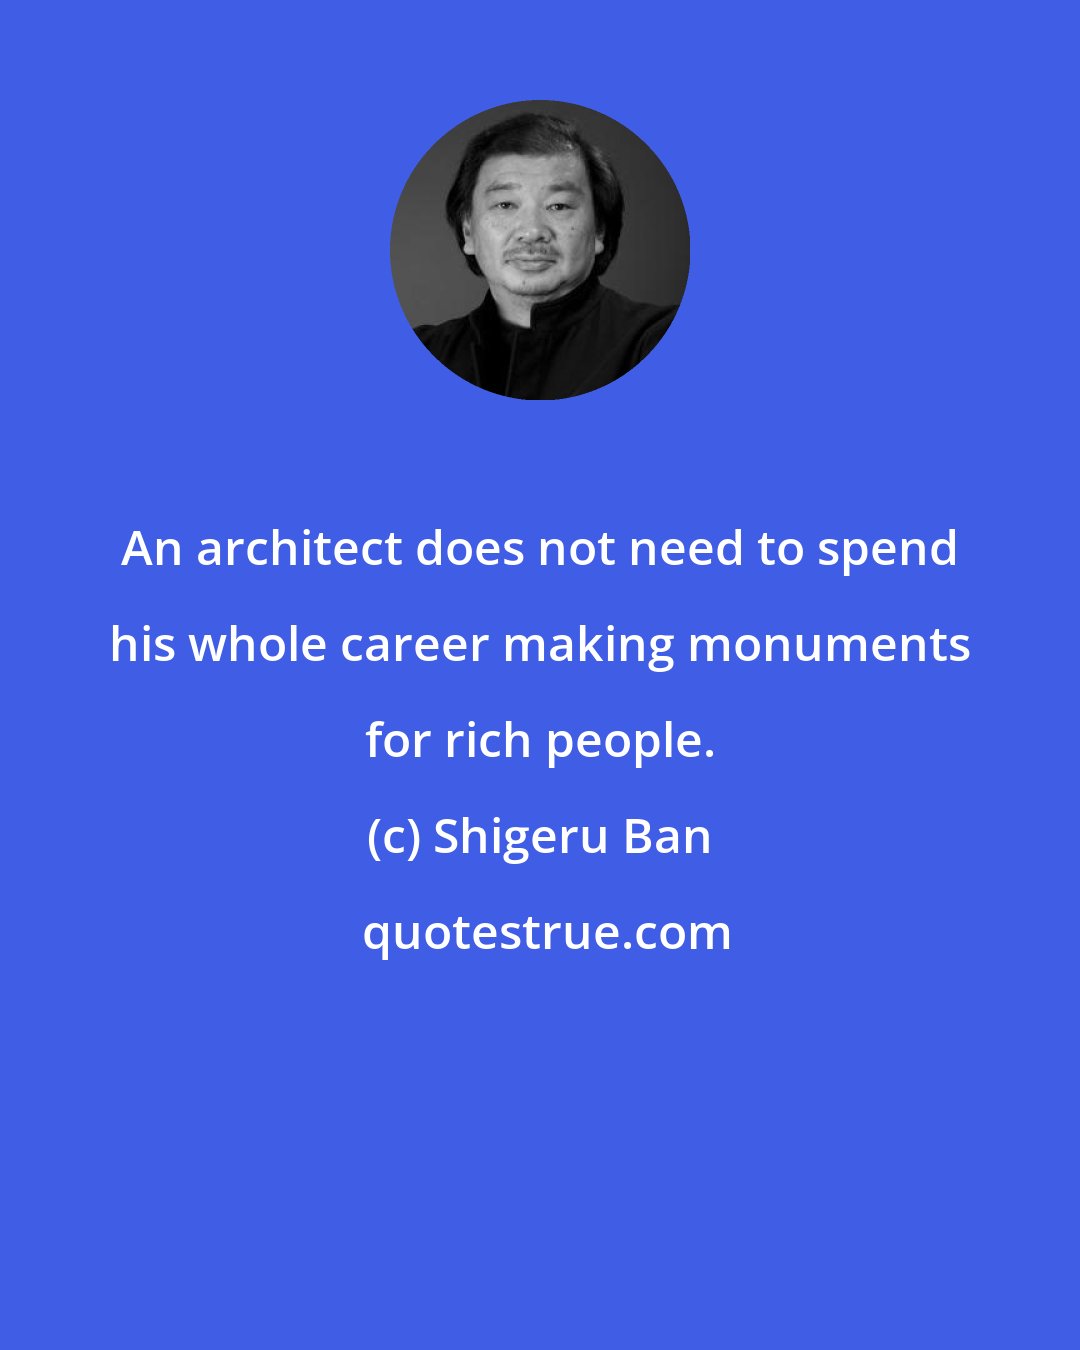 Shigeru Ban: An architect does not need to spend his whole career making monuments for rich people.